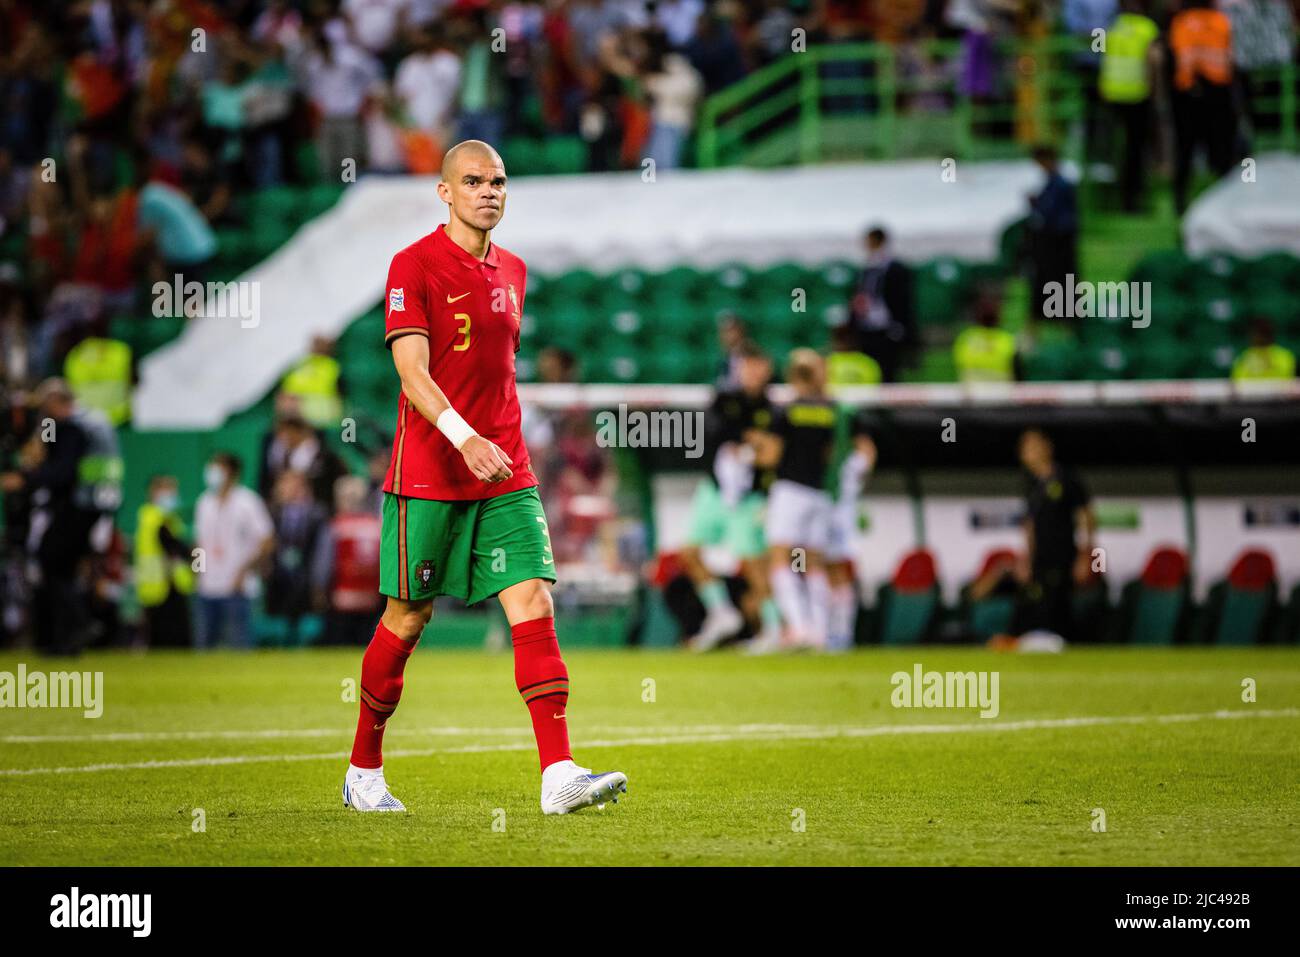 Lisbon, Portugal. 09th June, 2022. Kepler Laveran de Lima Ferreira known as Pepe of Portugal seen in action during the UEFA Nations League, League A group 2 match between Portugal and Czech Republic at the Jose Alvalade stadium. (Final score; Portugal 2:0 Czech Republic) (Photo by Henrique Casinhas/SOPA Images/Sipa USA) Credit: Sipa USA/Alamy Live News Stock Photo